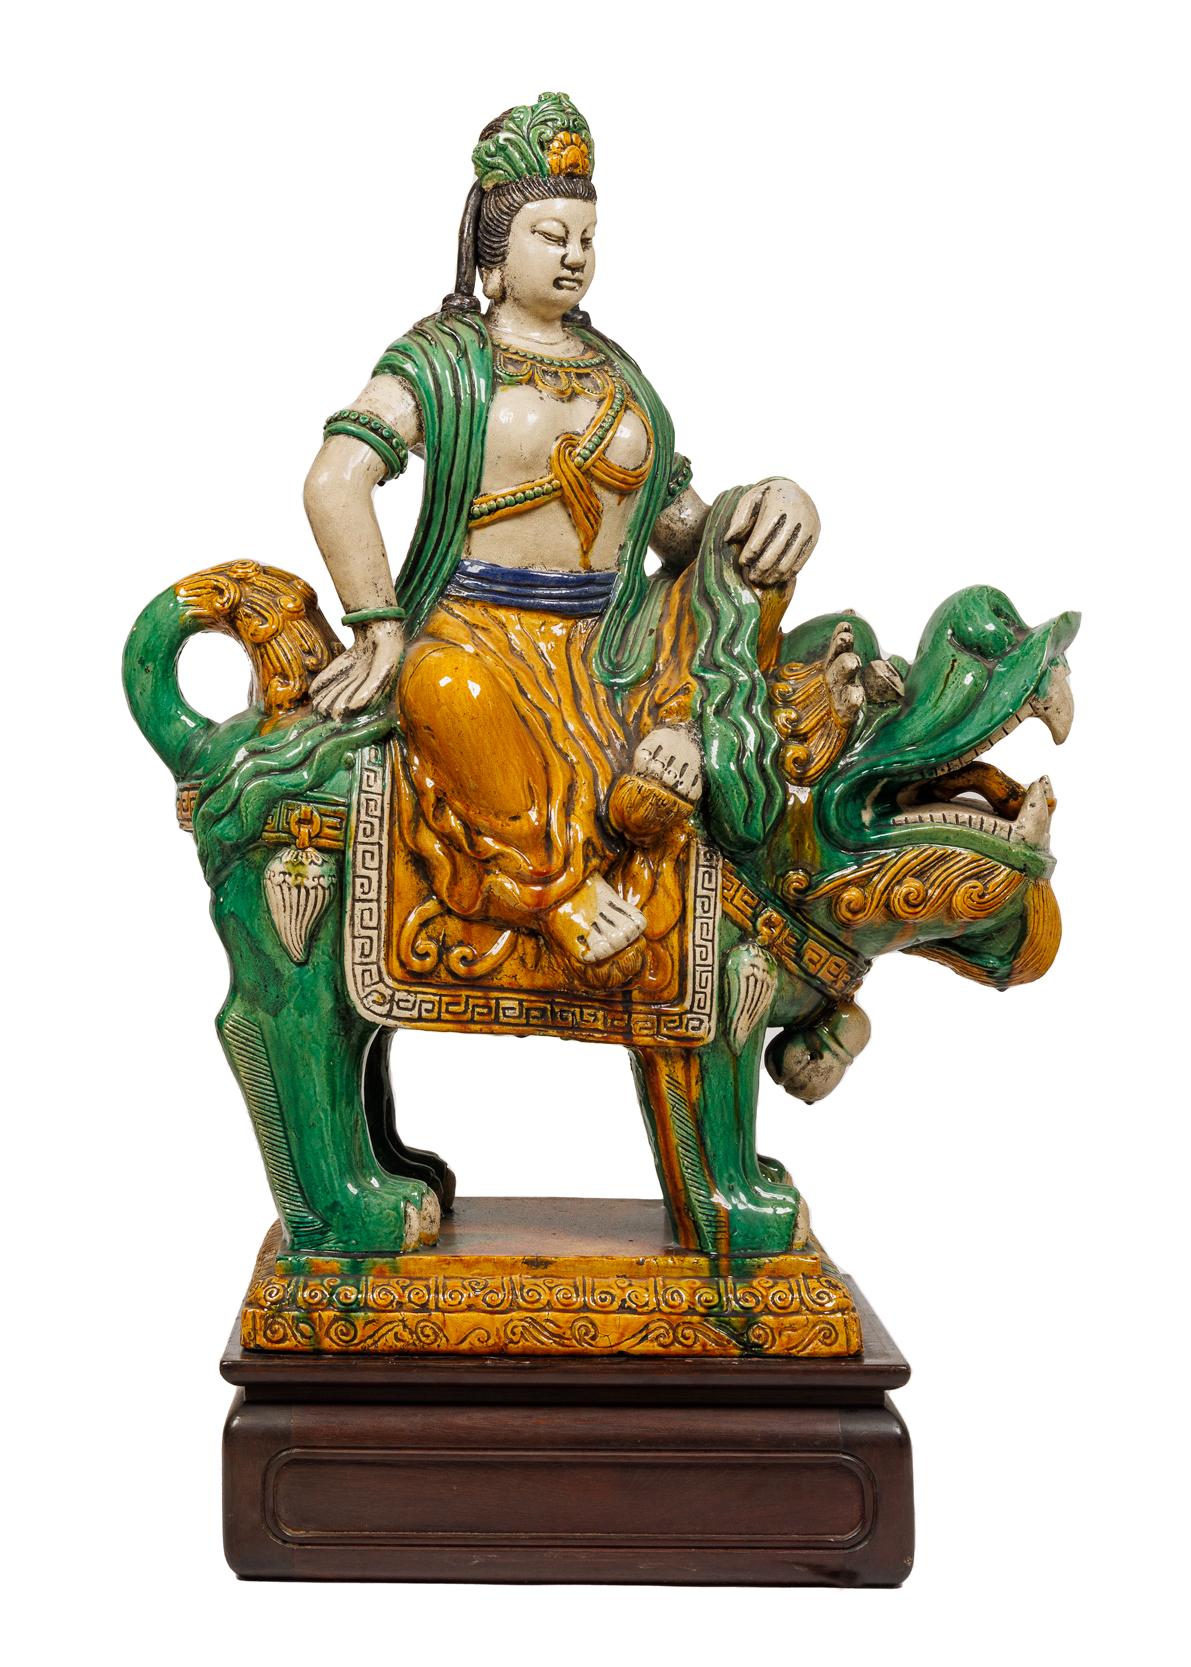 A Monumental pair of Chinese Sancai Glazed pottery figures / sculptures of Guan Yin and Lion on Wood Bases

Chinese sancai glazed figures of Guan Yin and lion are a type of ceramic artwork that originated in China during the Tang dynasty (618-907